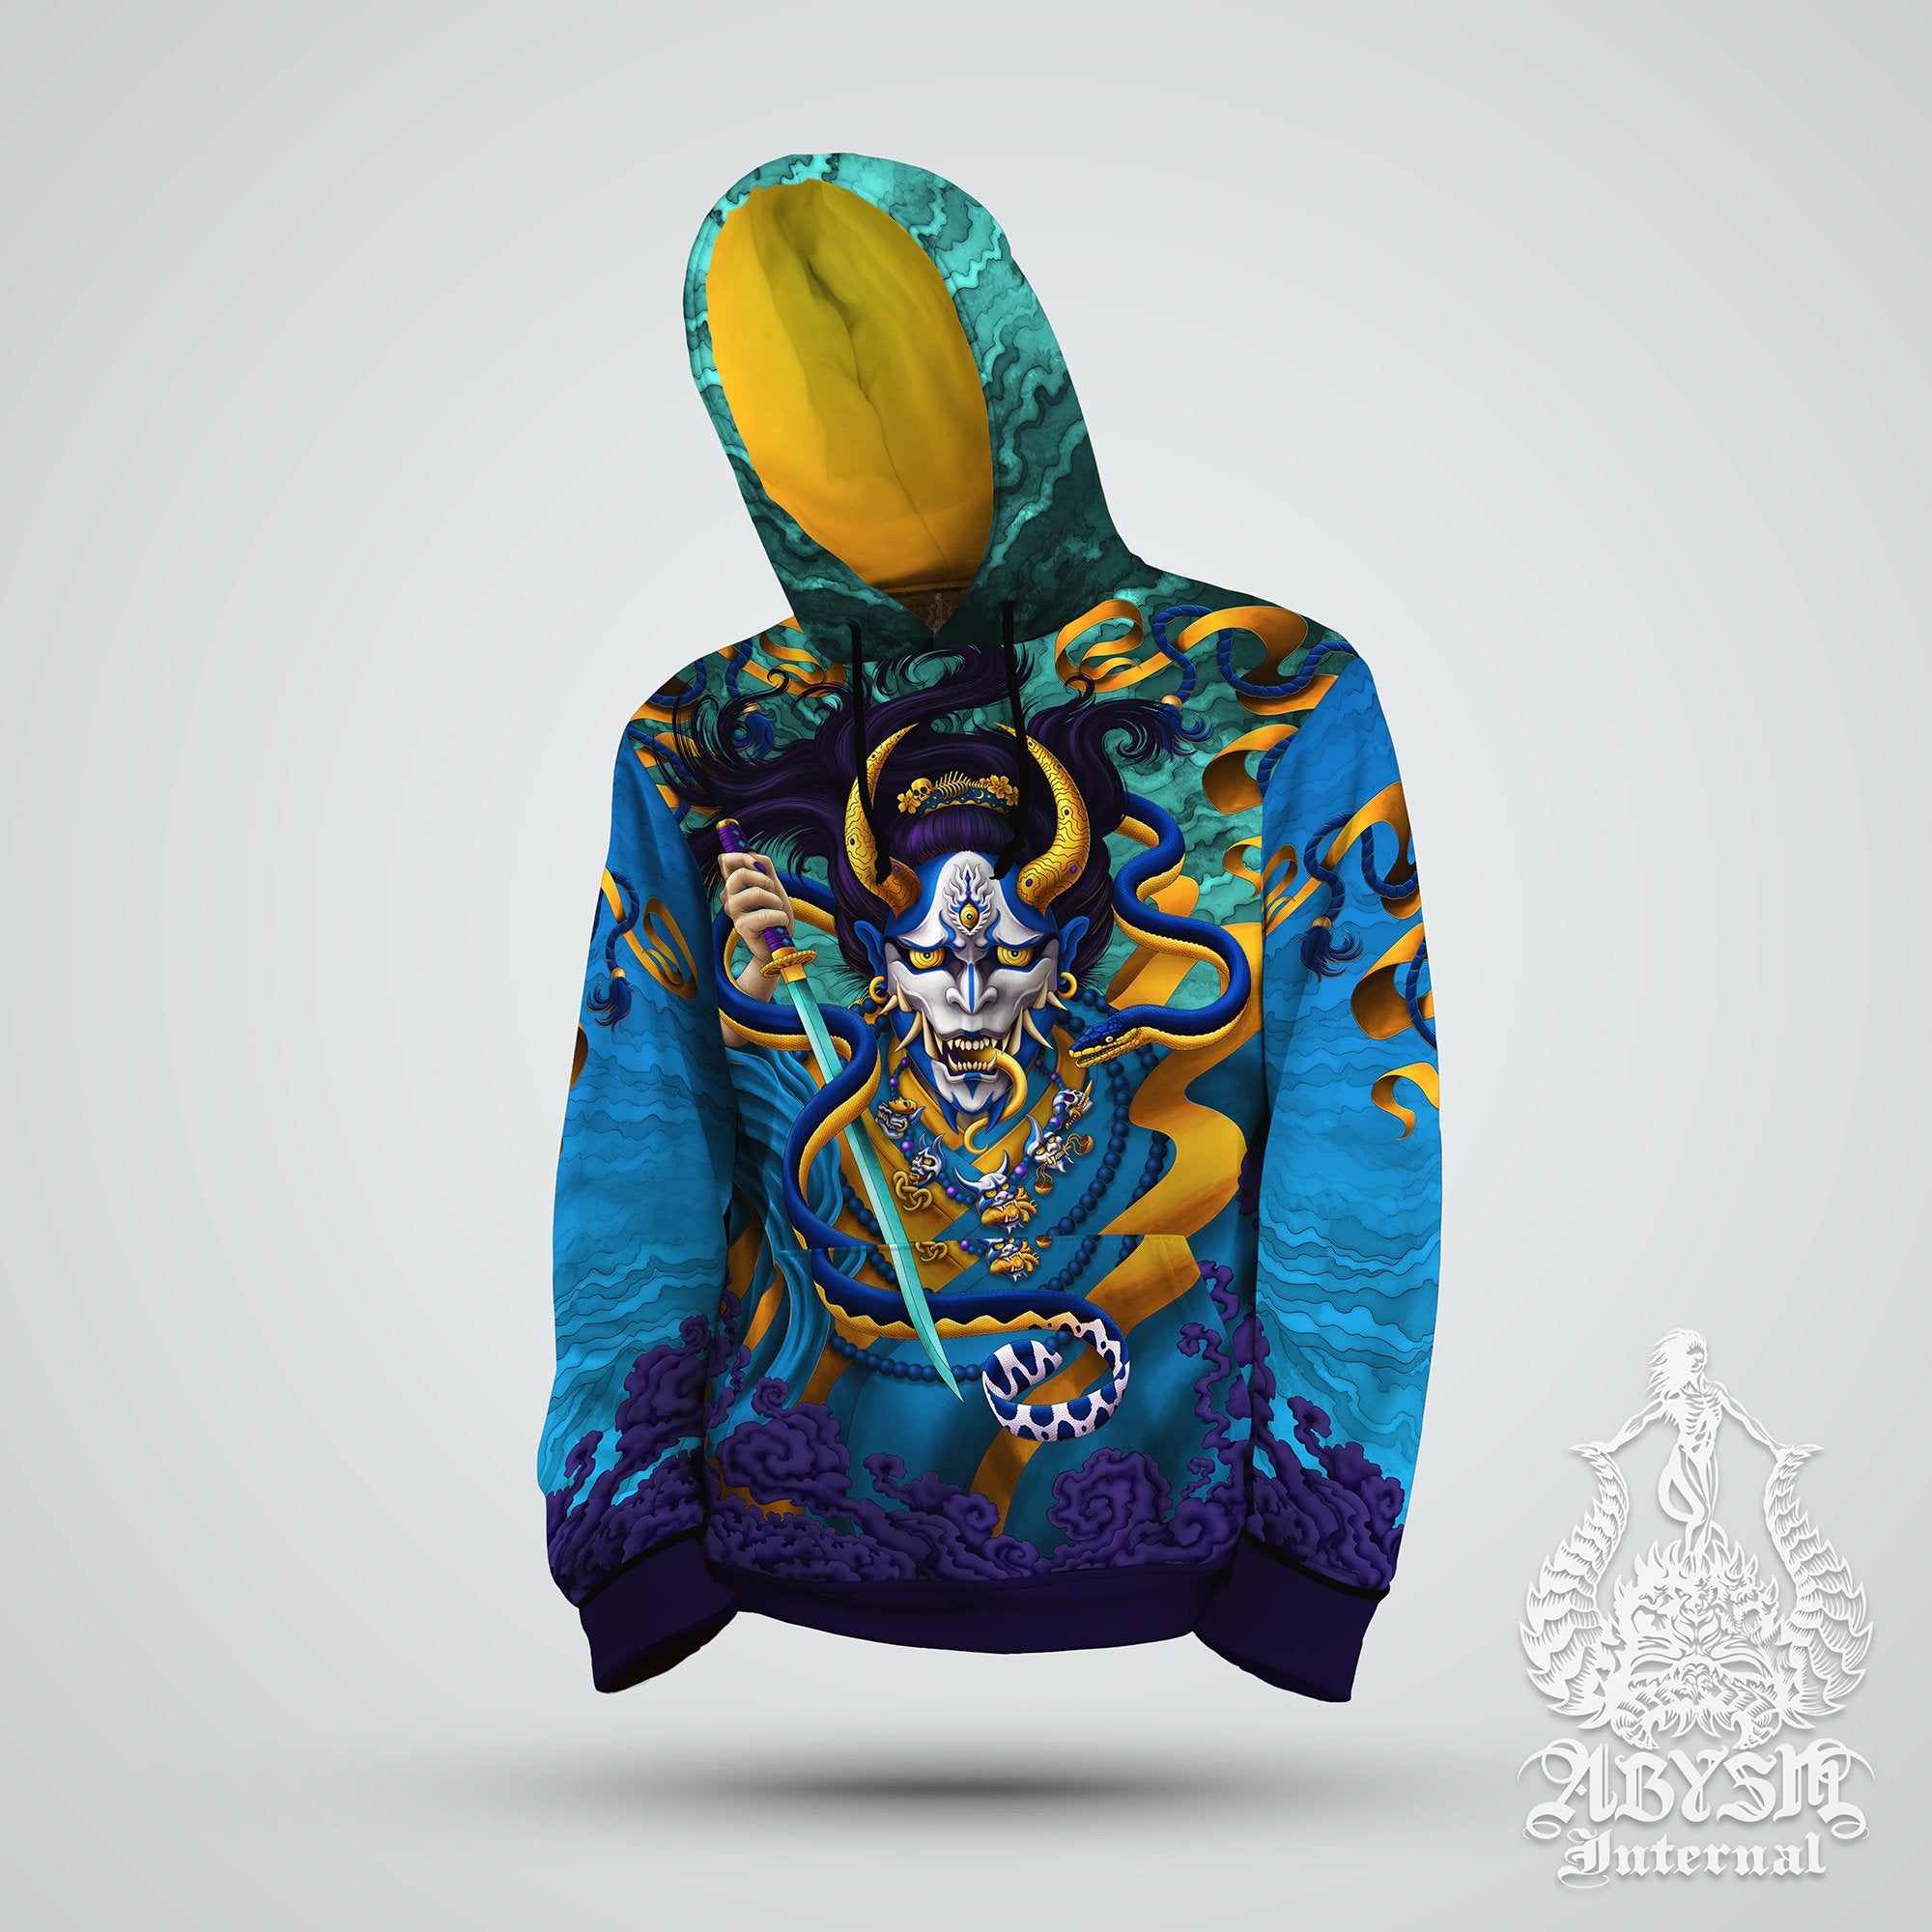 Parkour Hoodie, Japanese Demon Sweater, Manga and Anime Streetwear, Fantasy Street Outfit, Hannya Pullover, Alternative Clothing, Unisex - Oni and Snake, Cyan Gold - Abysm Internal